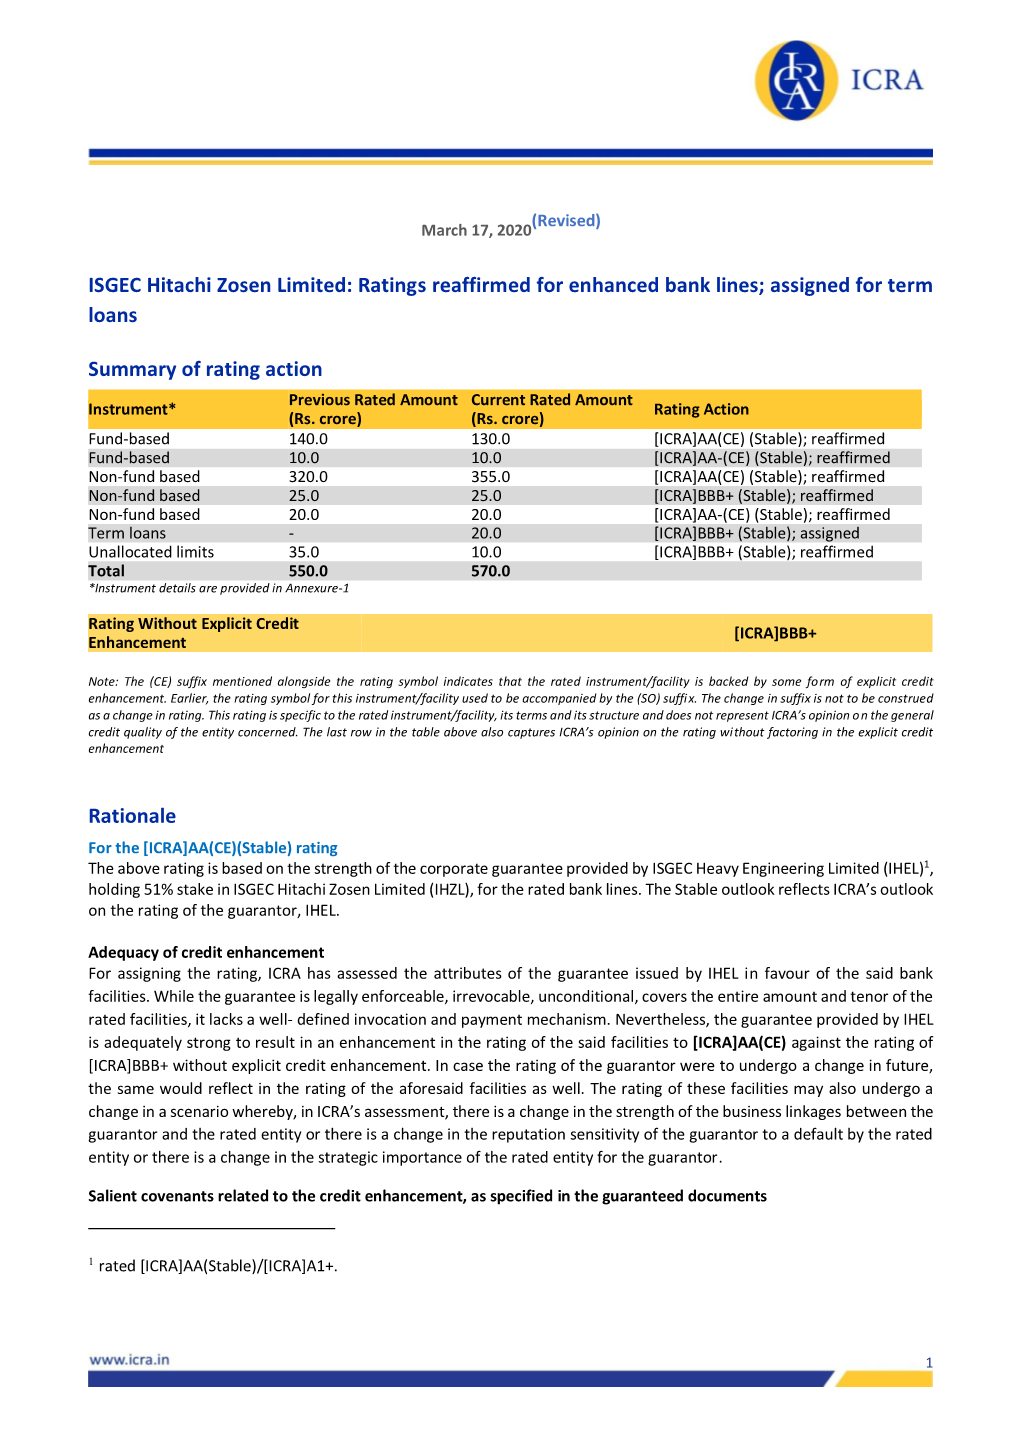 ISGEC Hitachi Zosen Limited: Ratings Reaffirmed for Enhanced Bank Lines; Assigned for Term Loans